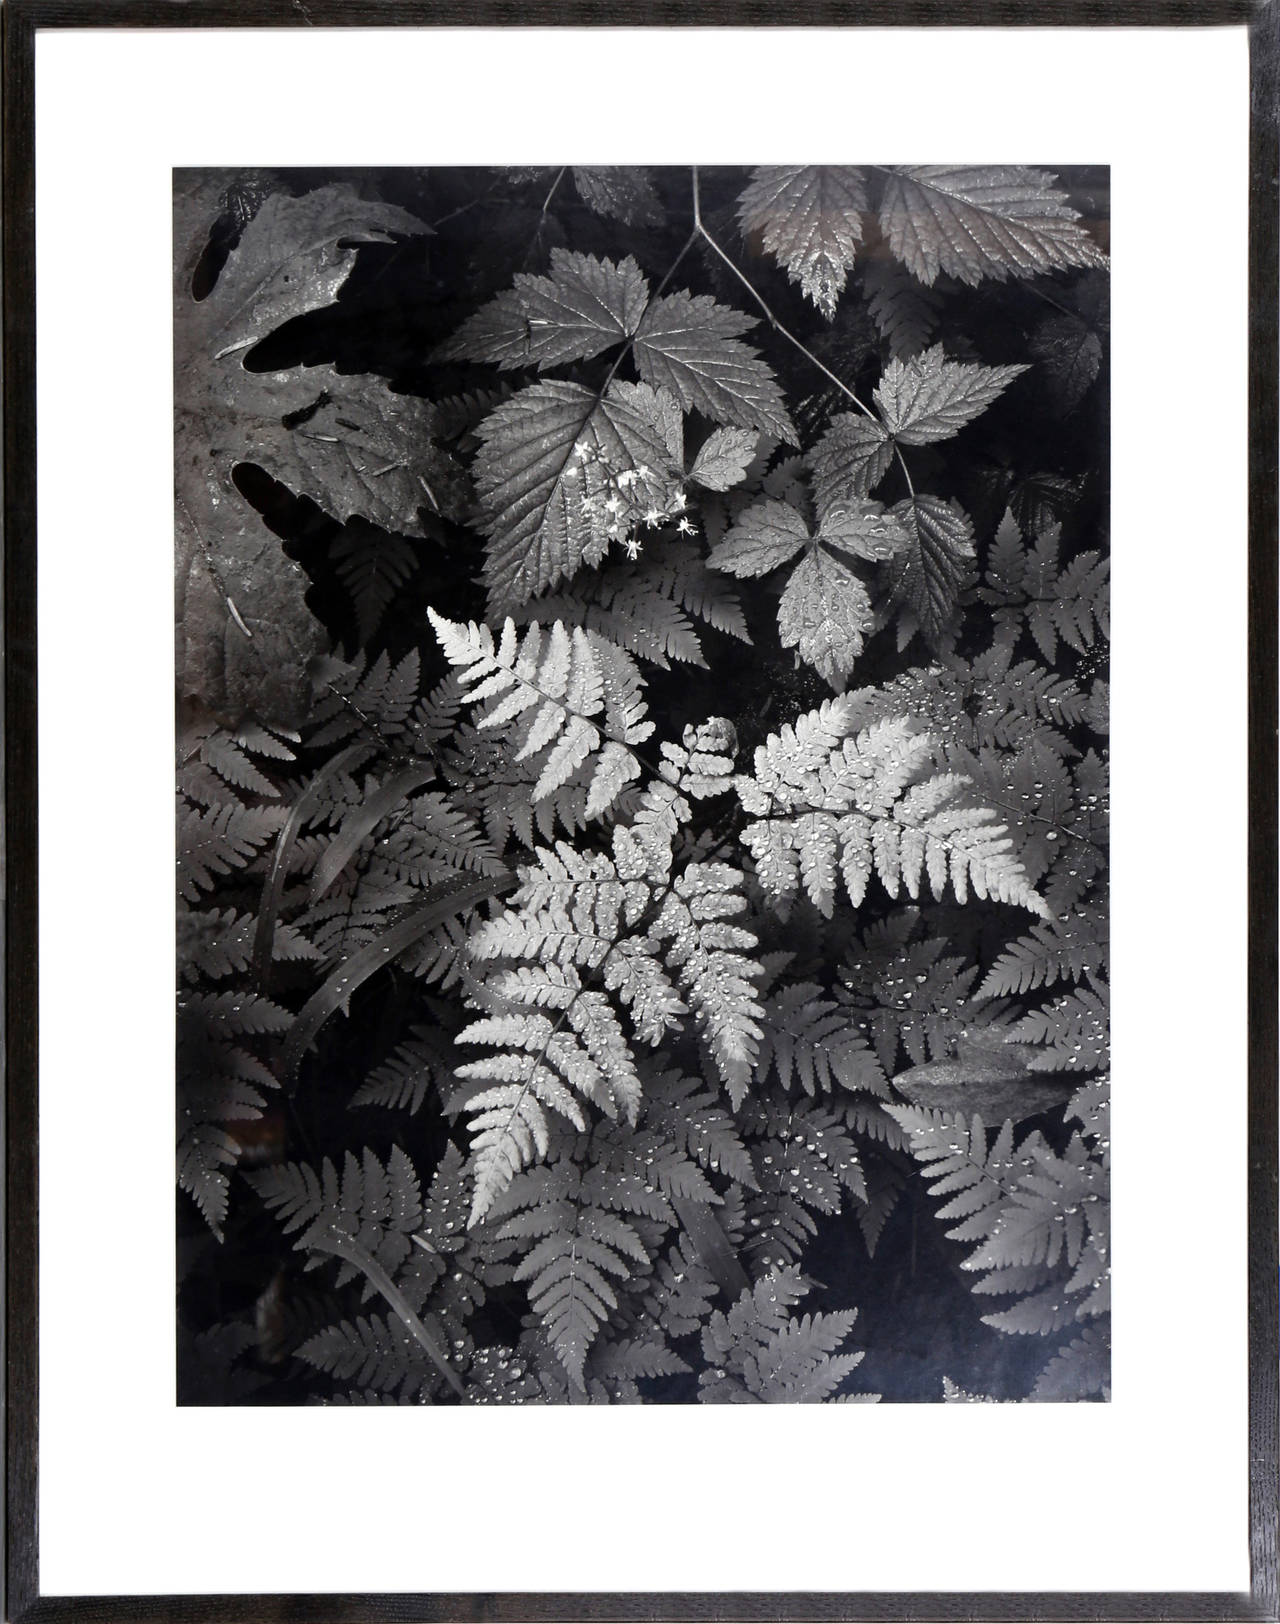 A gelatin silver print by Ansel Adams photographed in 1942 (later printing). A classic nature photograph of ferns with deep contrasting shadows and highlights. 

Artist: Ansel Adams, American (1902 - 1984)
Title: Ferns, Mount Rainier National